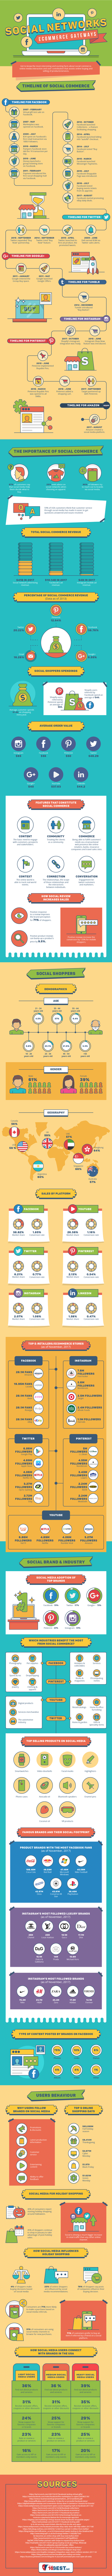 Social Networks and their importance in Ecommerce Gateways